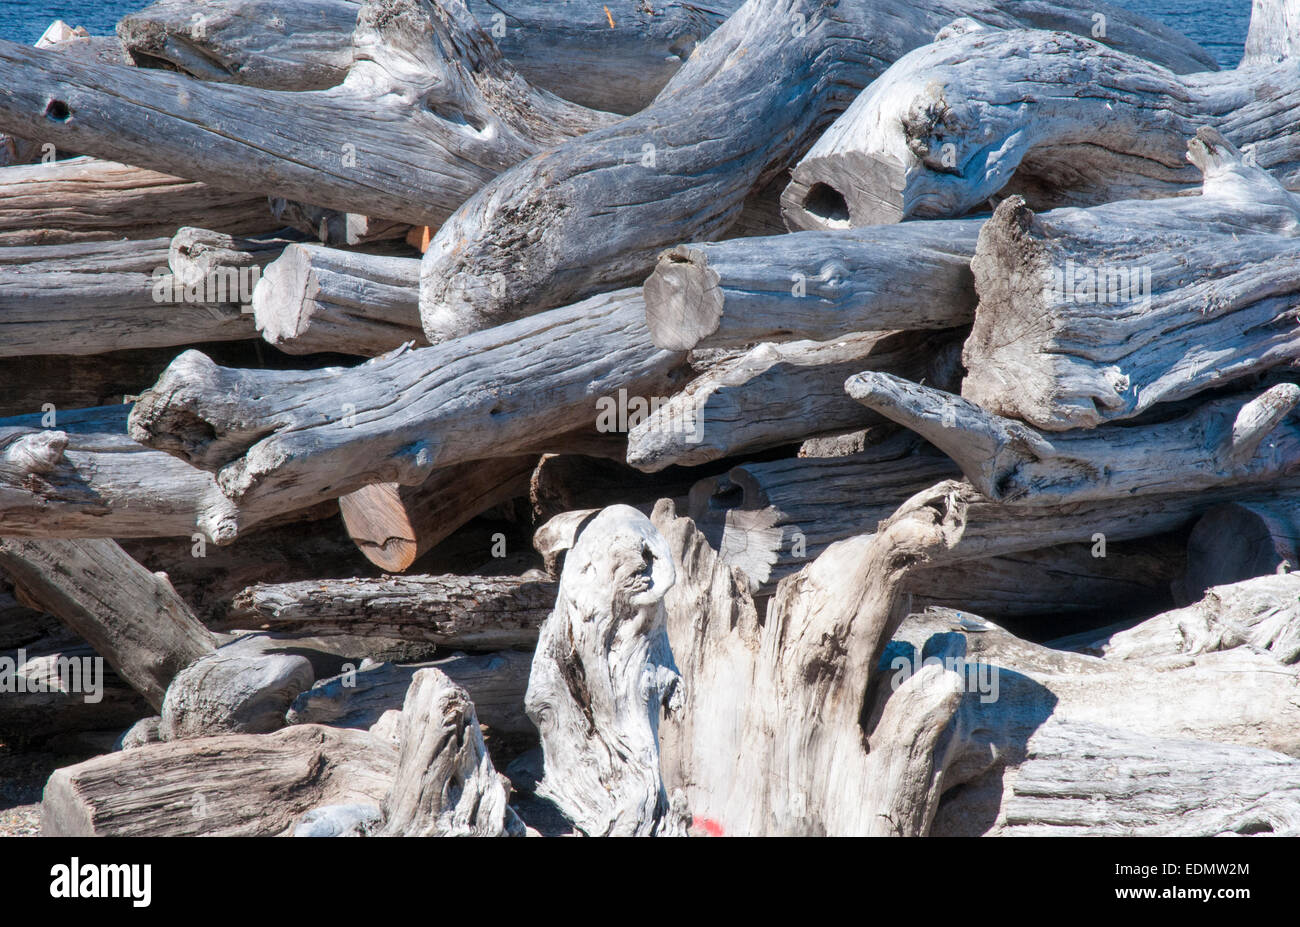 Huon pine logs, salvaged from the bed of the Gordon River, await processing at a specialised mill in Strahan, Tasmania Stock Photo